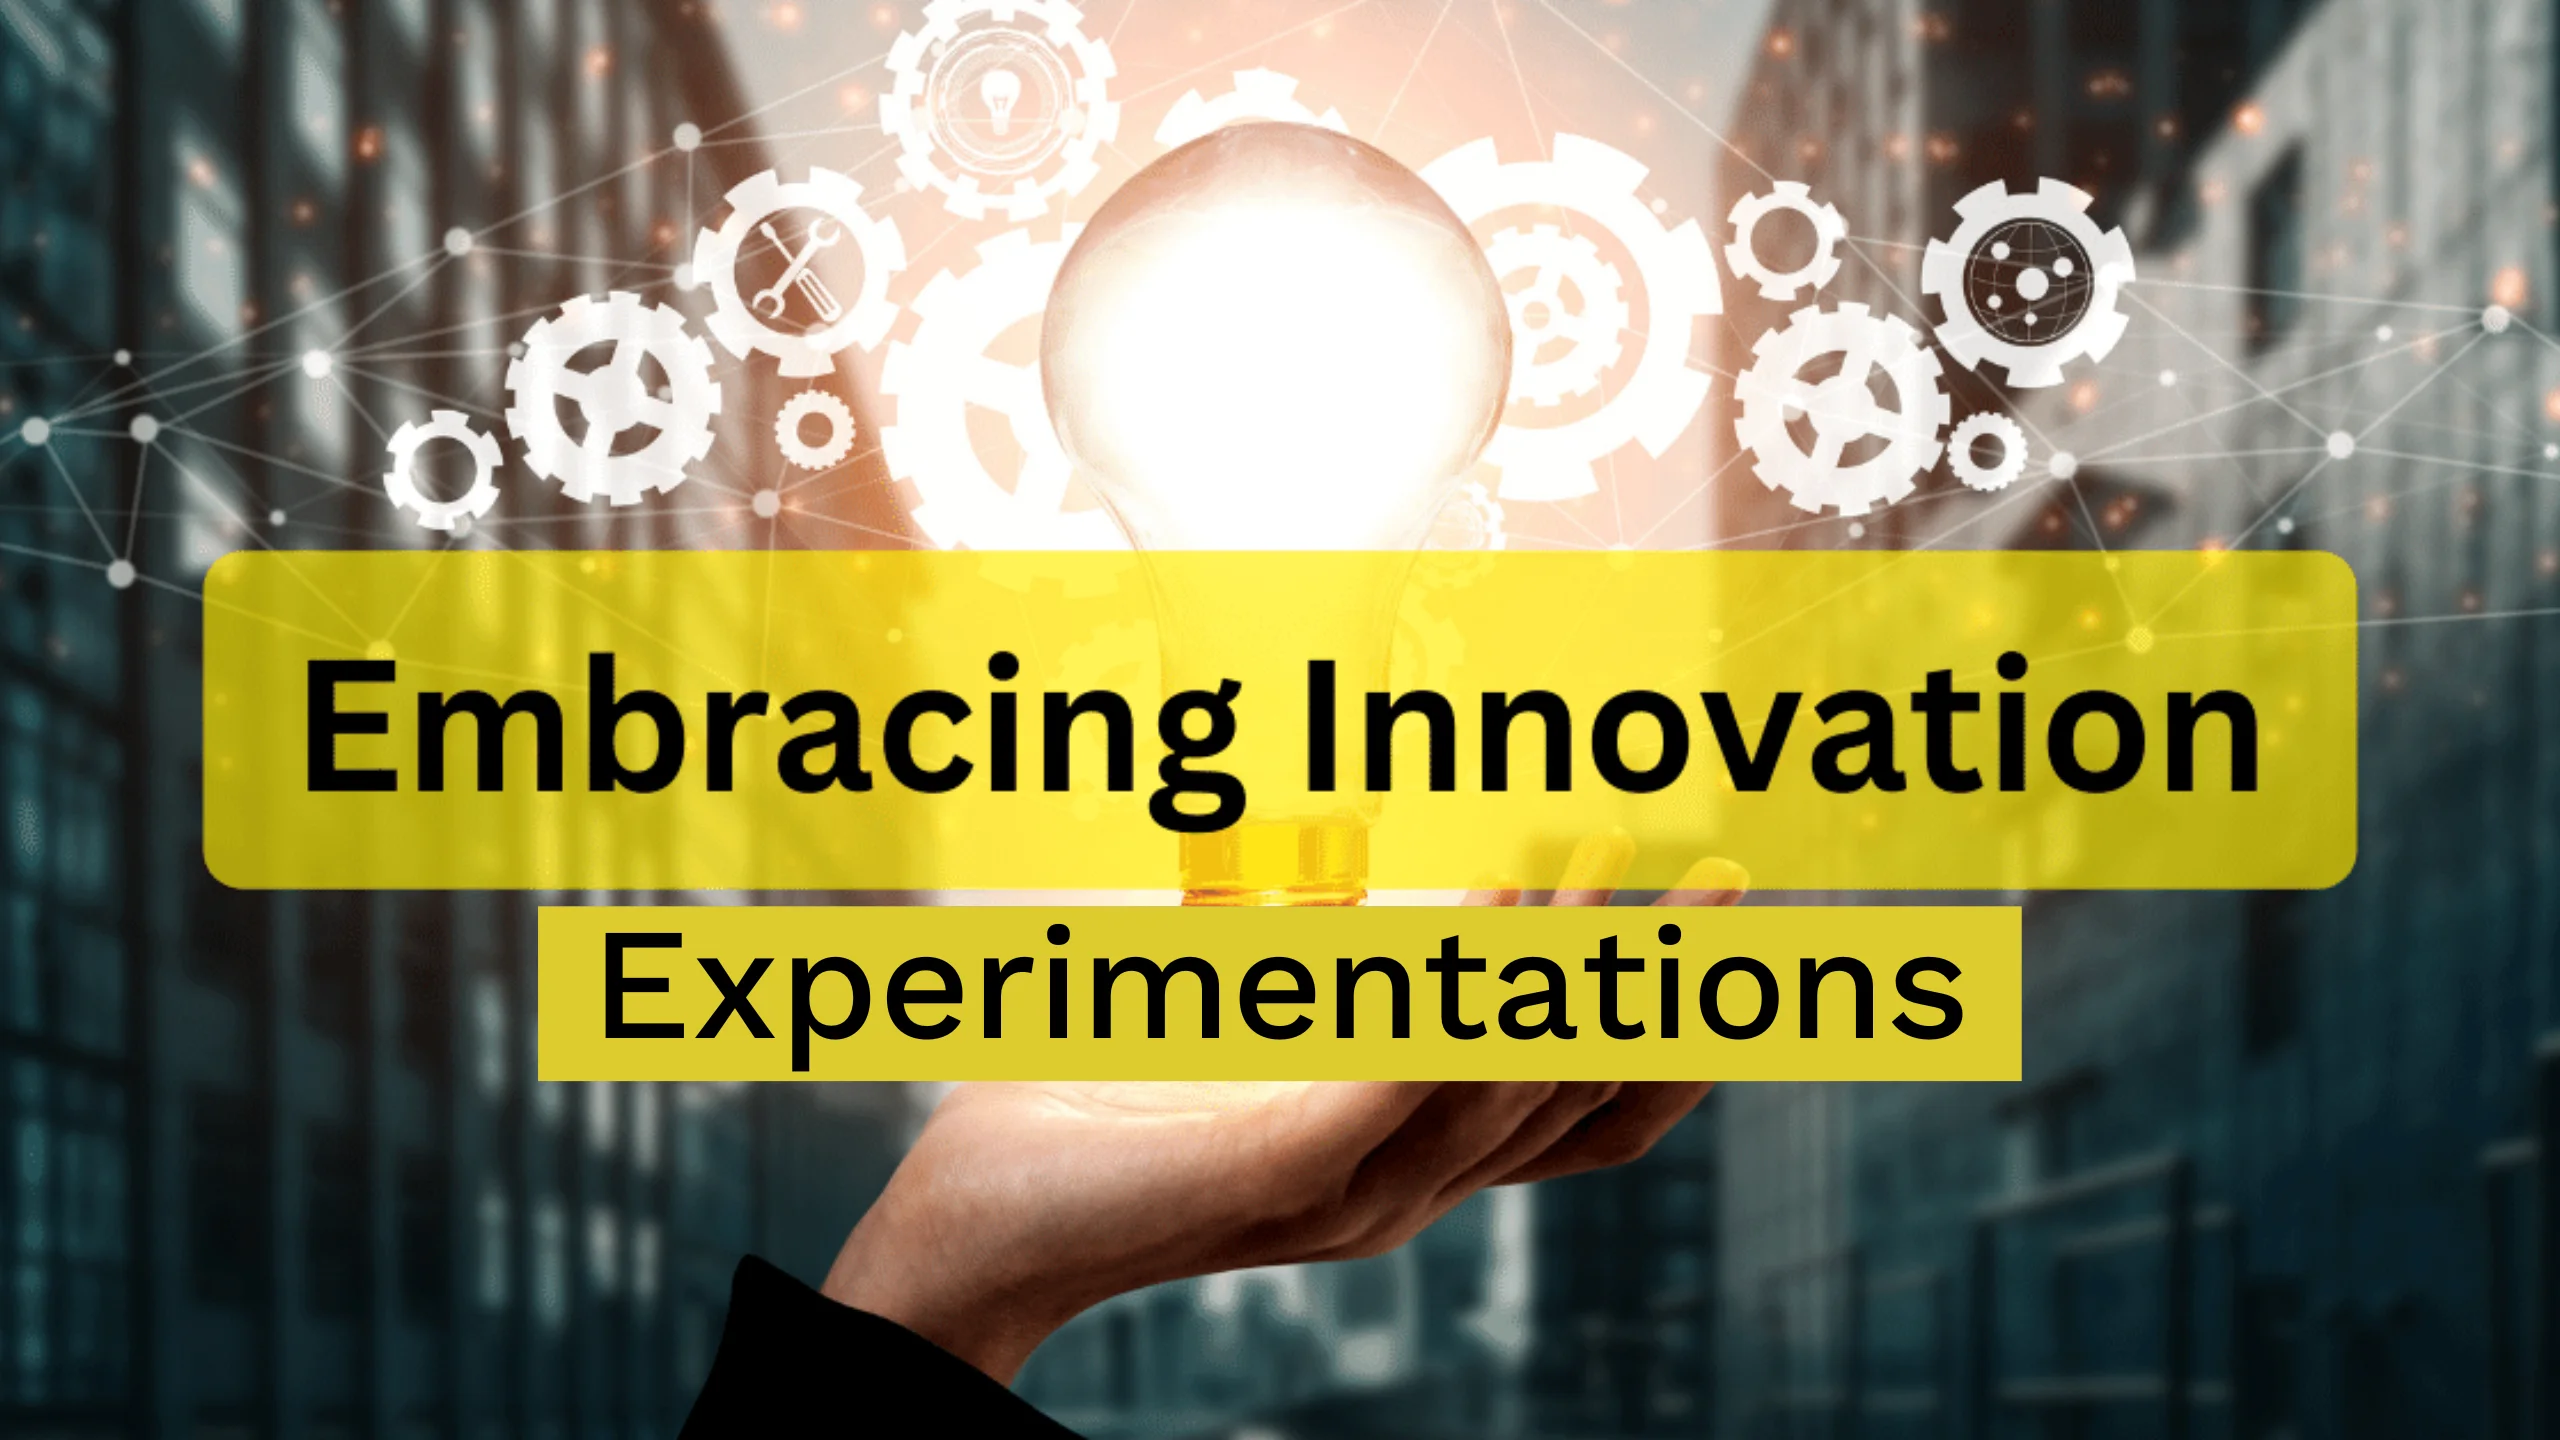 Embrace innovation and experimentation to foster a culture of creativity and growth. Encourage new ideas, test novel approaches, and continuously improve to stay ahead in a dynamic market.